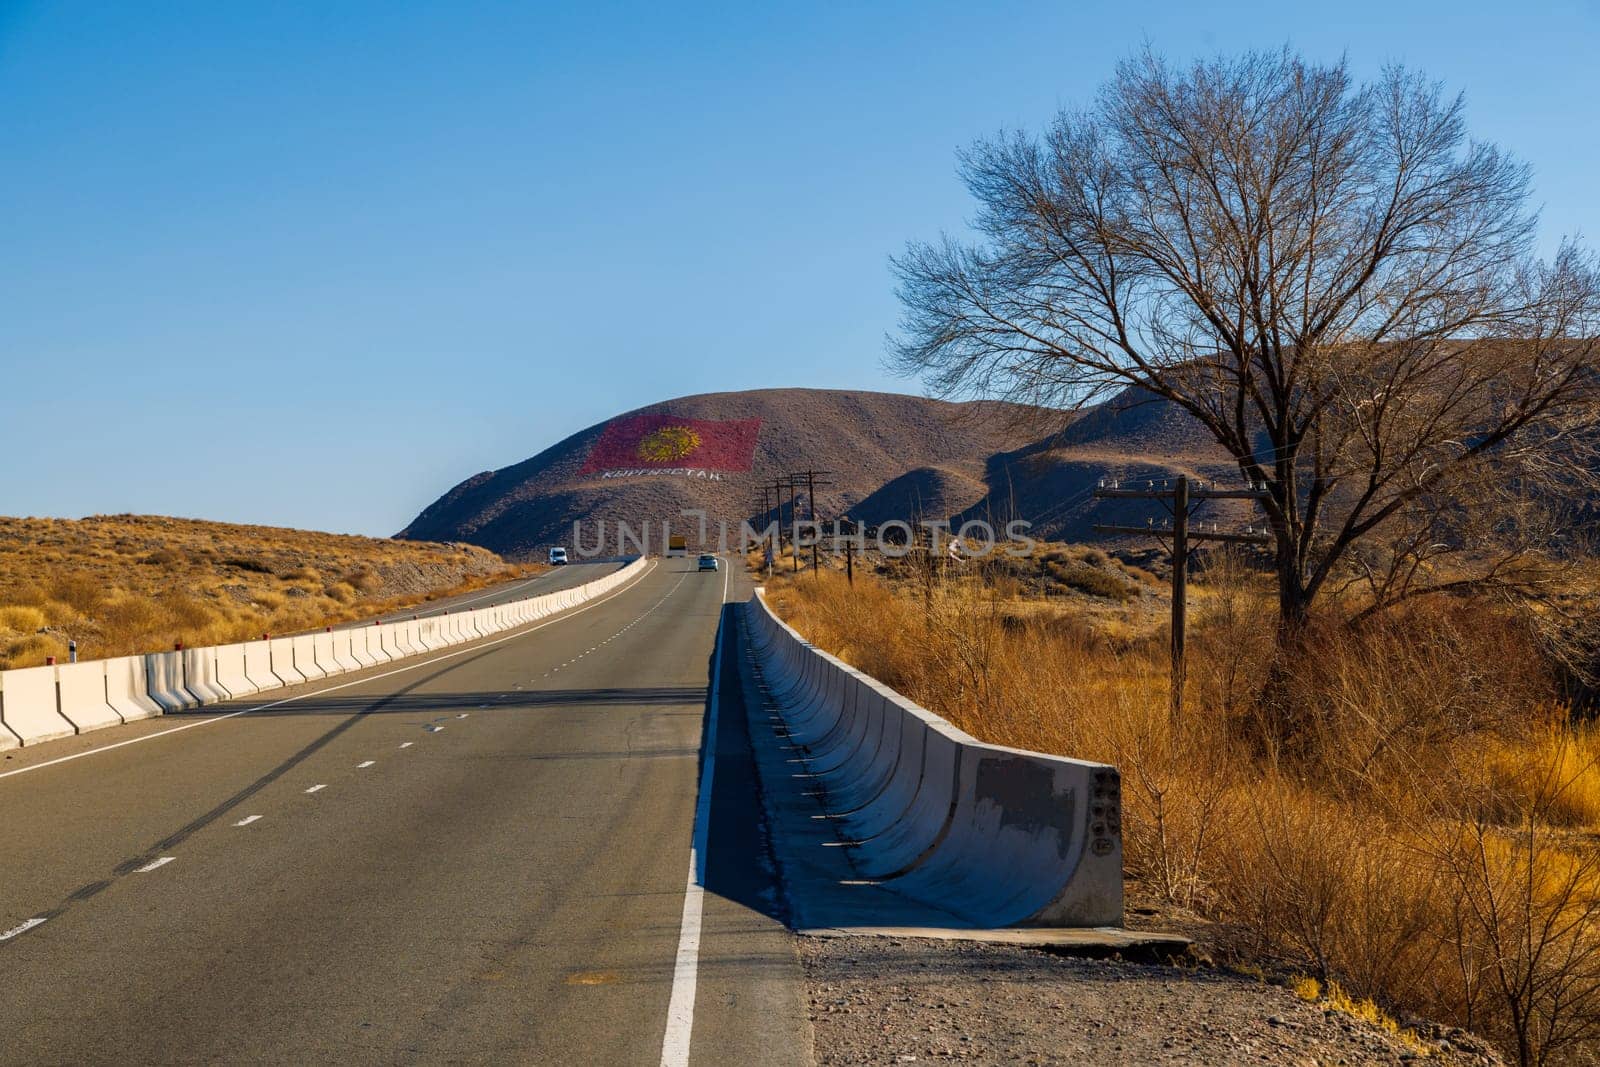 A road runs alongside a concrete barrier, dividing the asphalt from the natural landscape. The flag of Kyrgyzstan is drawn on a mountain at sunny autumn day.